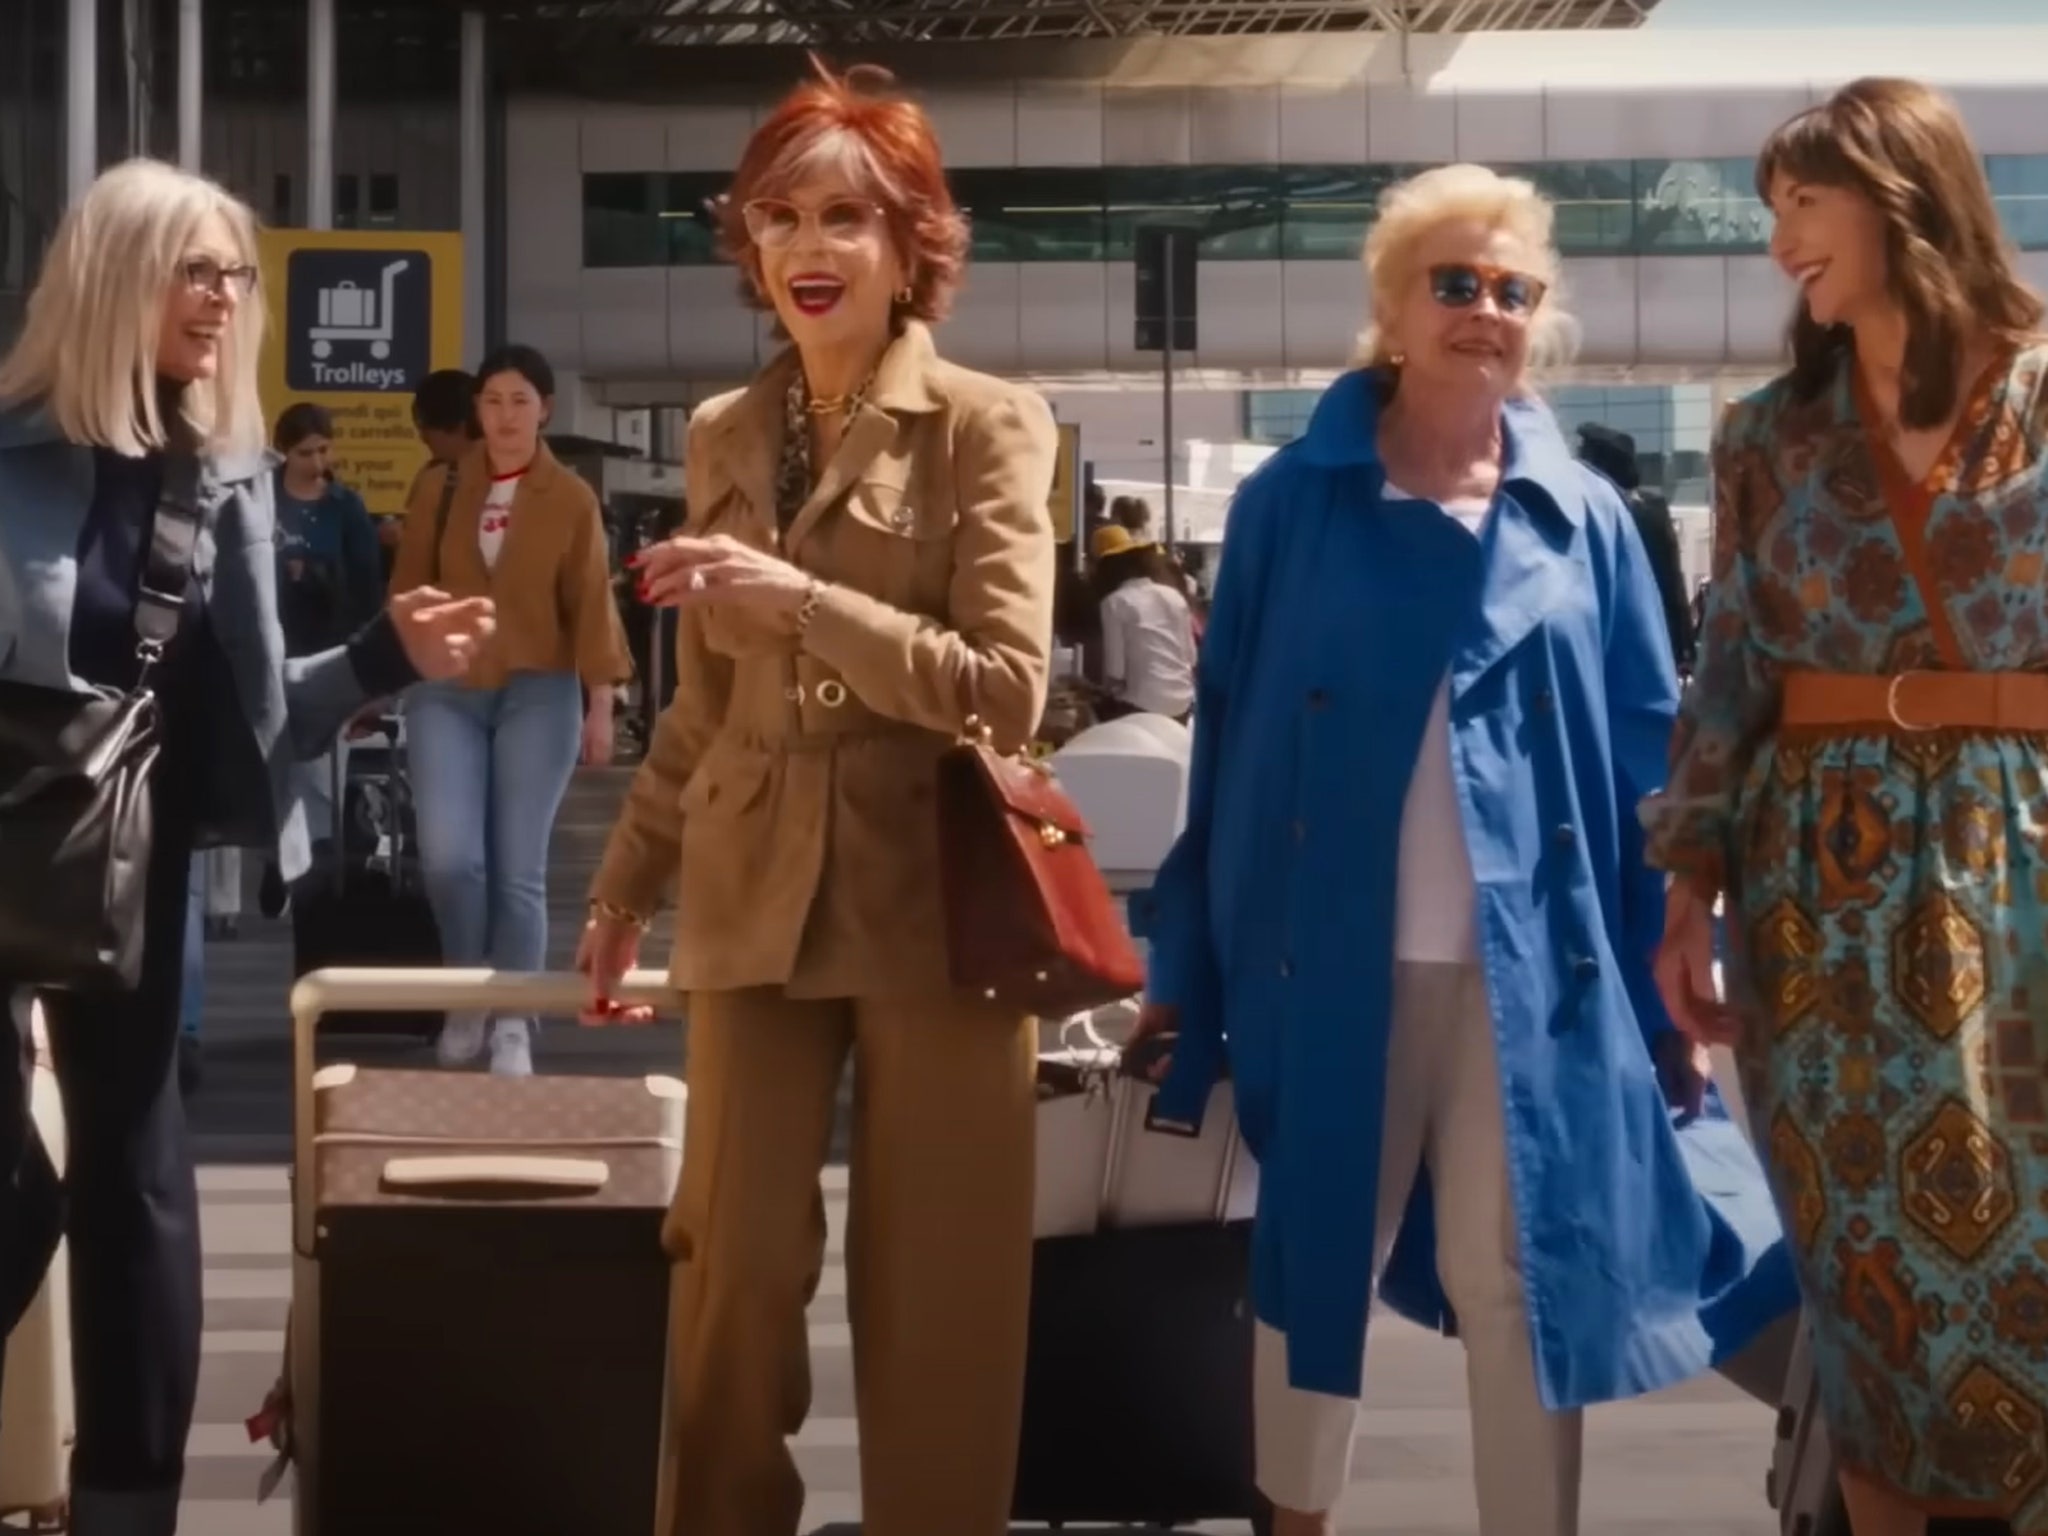 Book Club 2: Jane Fonda, Diane Keaton and the Ladies Are Back in Raunchy Trailer